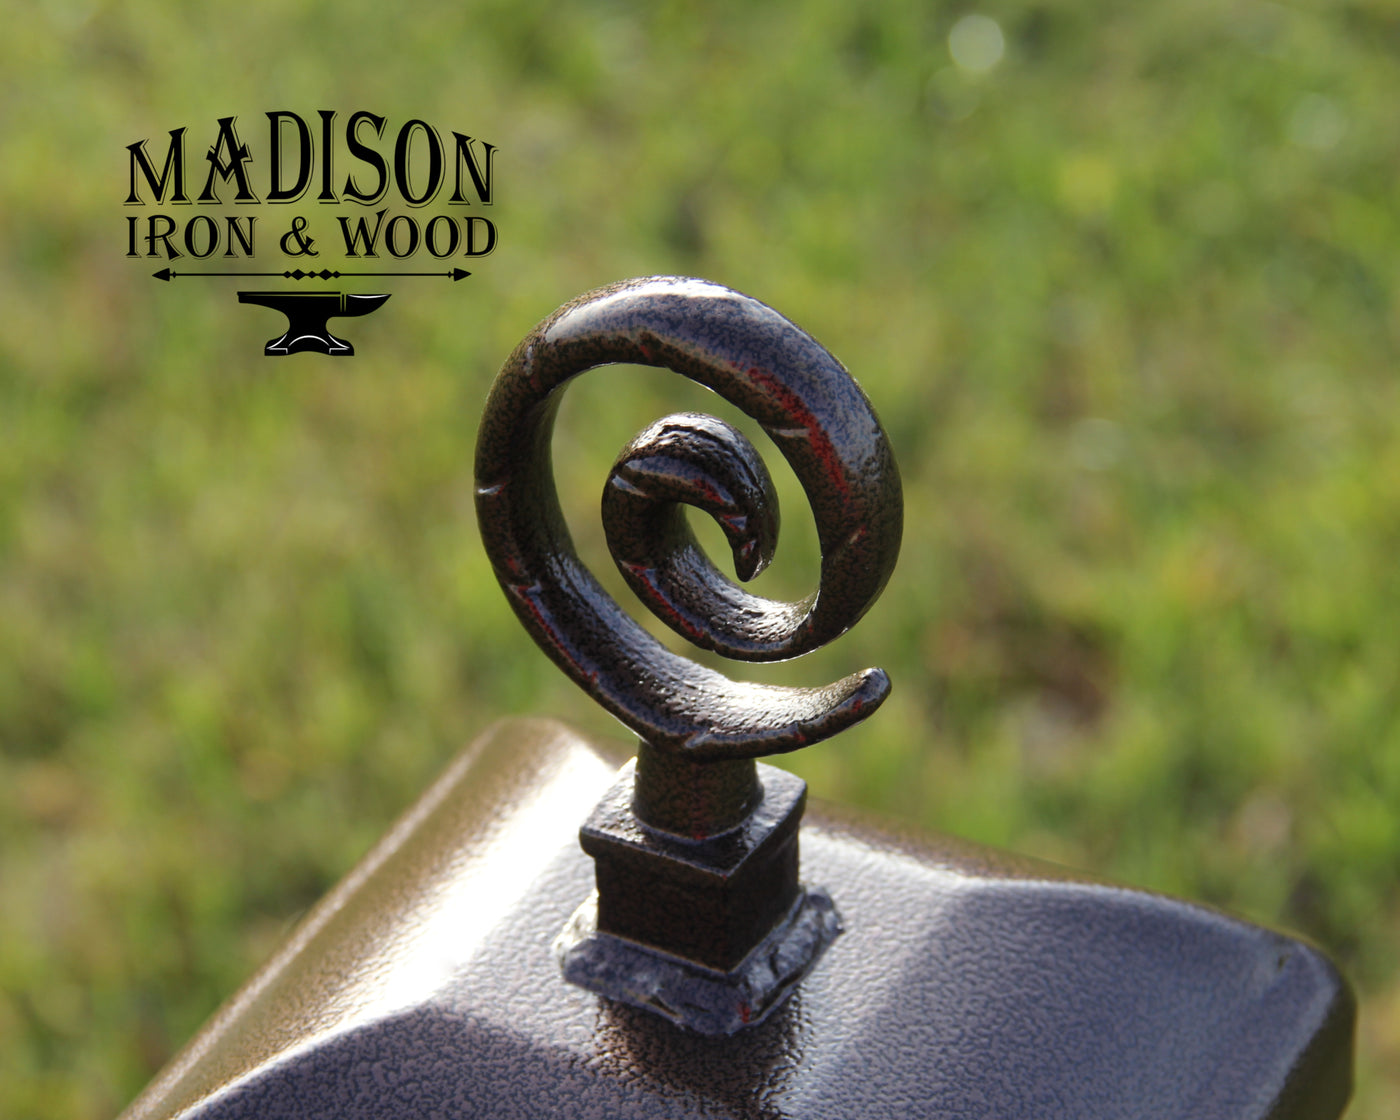 6x6 Spiral post cap - Madison Iron and Wood - Post Cap - metal outdoor decor - Steel deocrations - american made products - veteran owned business products - fencing decorations - fencing supplies - custom wall decorations - personalized wall signs - steel - decorative post caps - steel post caps - metal post caps - brackets - structural brackets - home improvement - easter - easter decorations - easter gift - easter yard decor